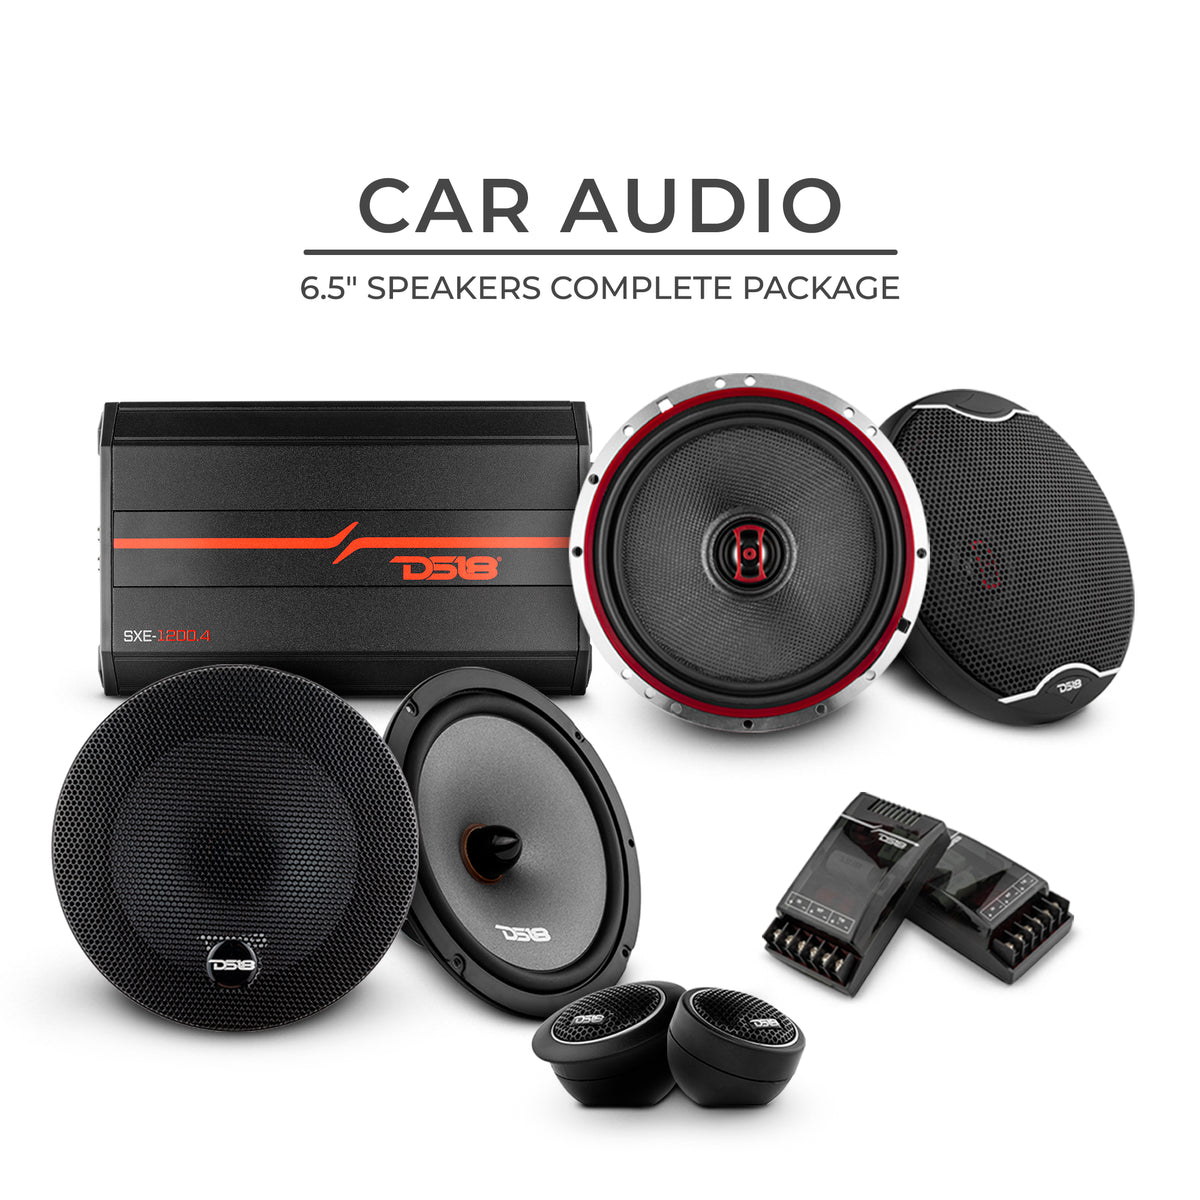 DS18 CARPK1-1 Sound Quality 6.5 Package With High Powered Amp